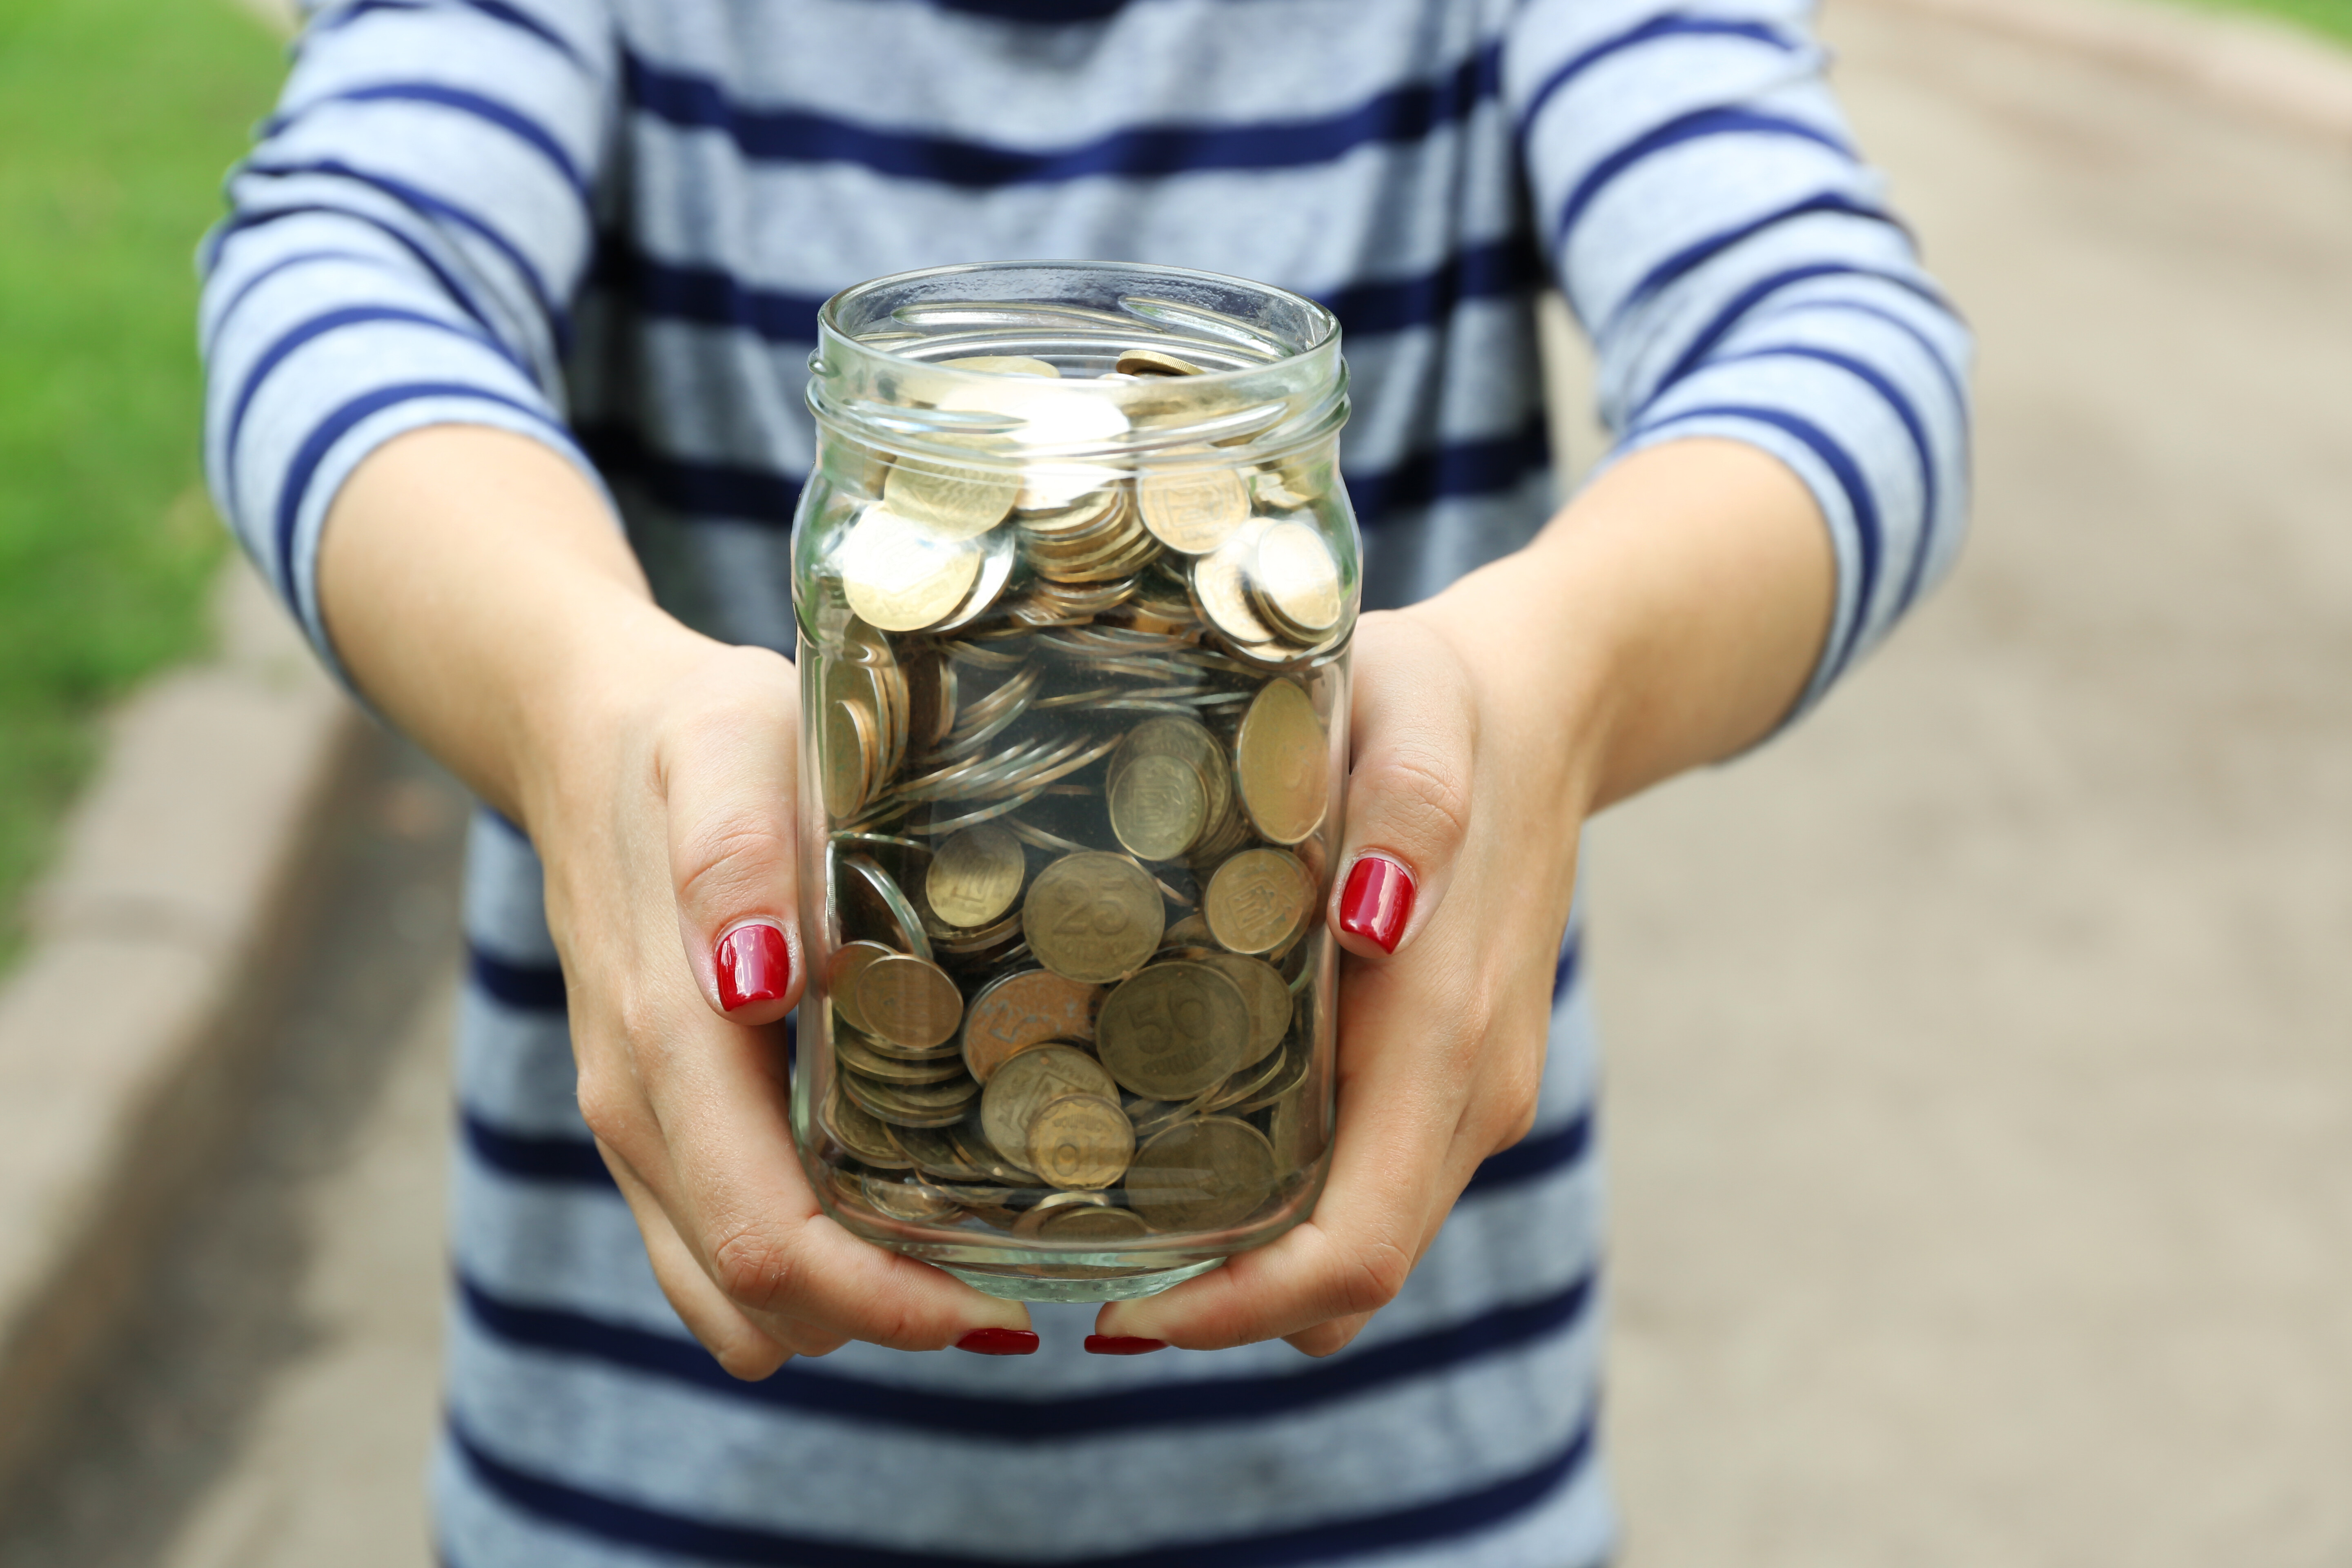 woman's hands holding a mason jar filled with coins. her arms are outstretched towards viewer